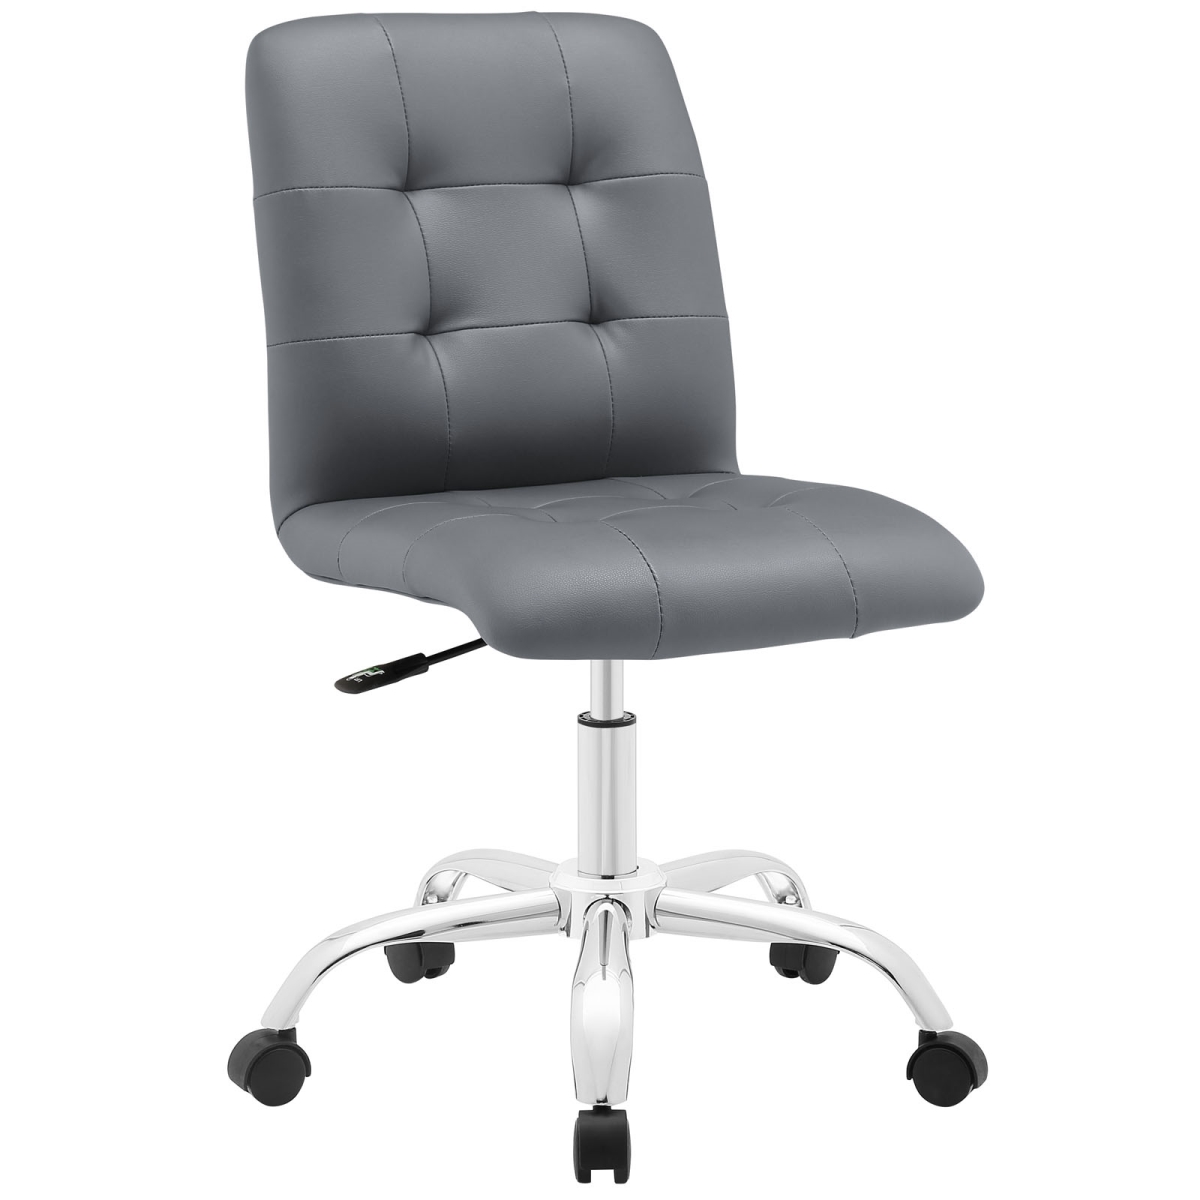 Modway Eei-1533-gry Prim Armless Mid Back Office Chair, Gray